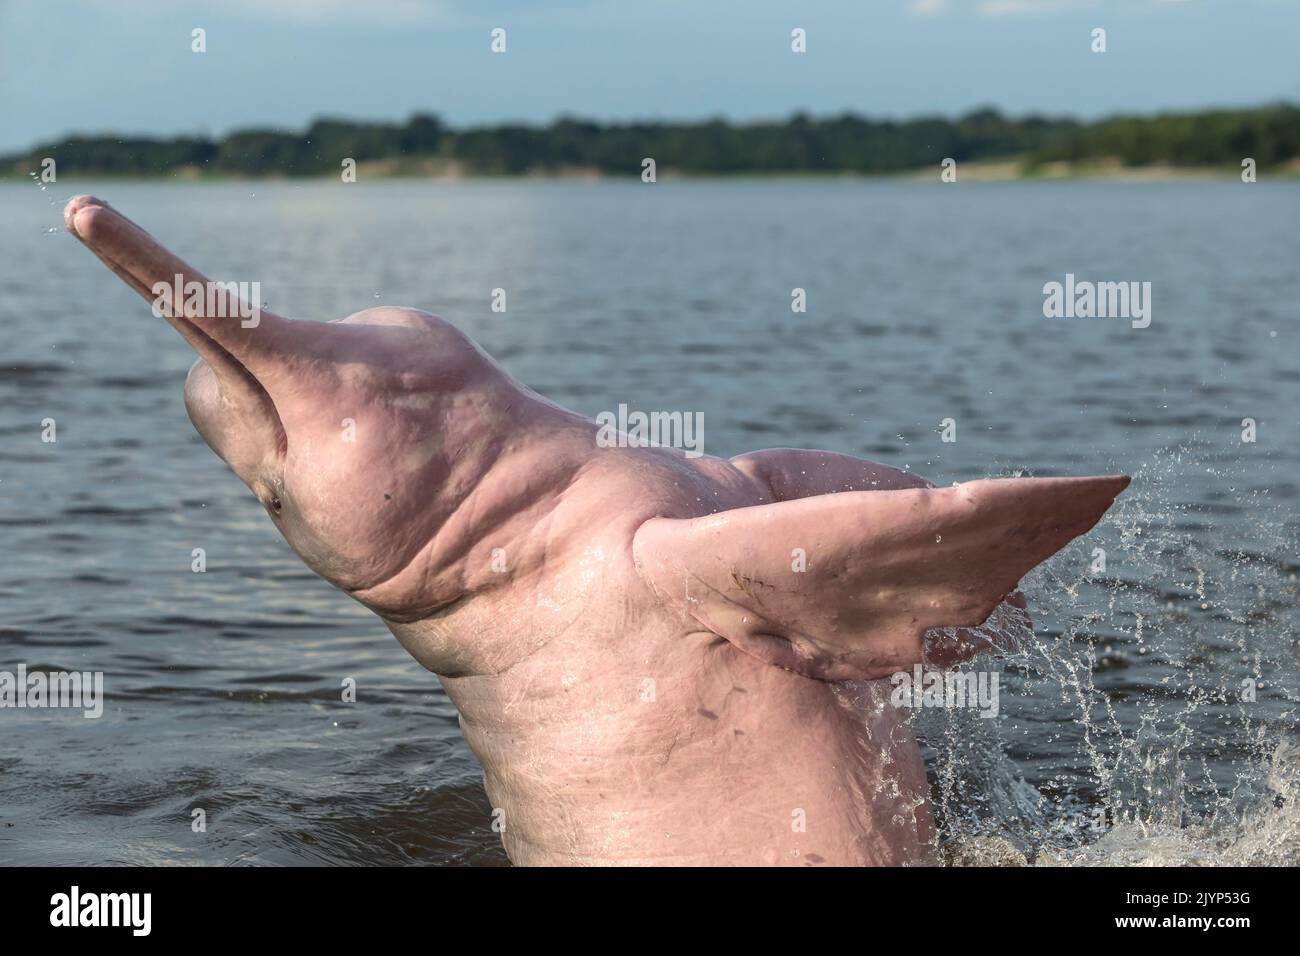 Amazon River Dolphin, Pink River Dolphin or Boto (Inia geoffrensis) , extremely rare picture of wild animal breaching , Threatened species (IUCN Red List), along Rio Negro, Amazon river basin, Amazonas state, Manaus, Brazil, South America Stock Photo